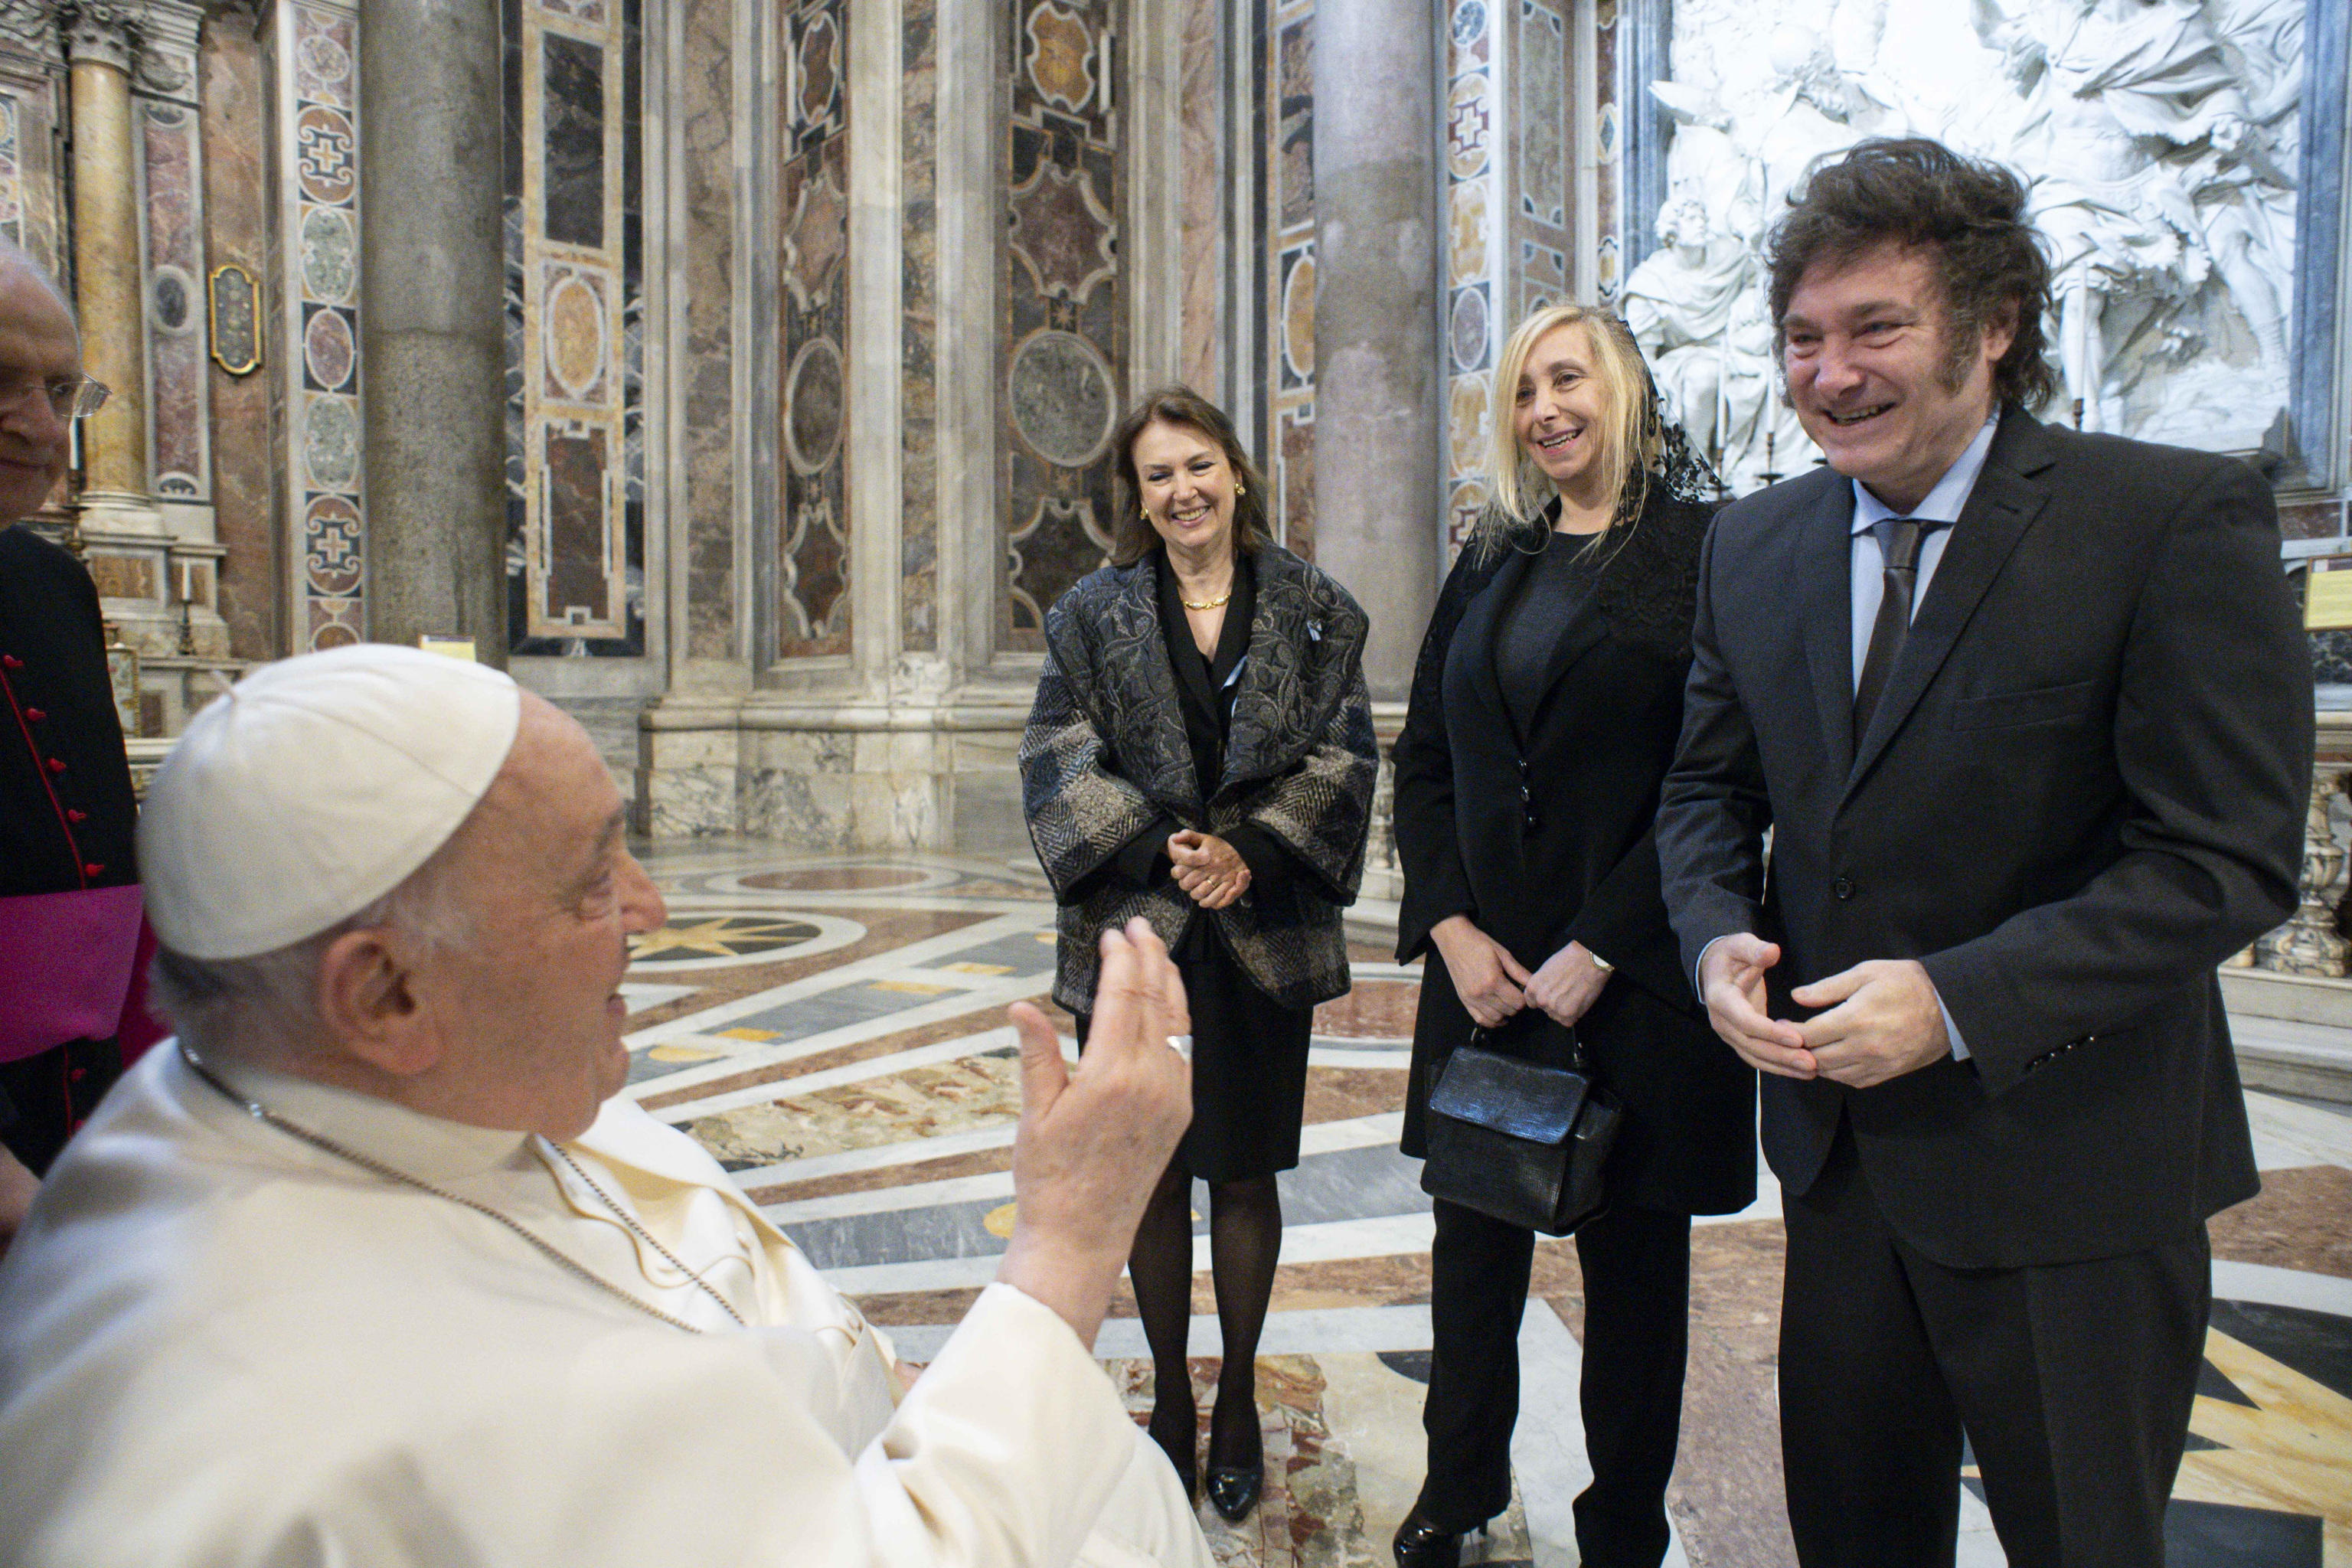 Pope Francis meets Argentina's President prior to canonization of Mama Antula